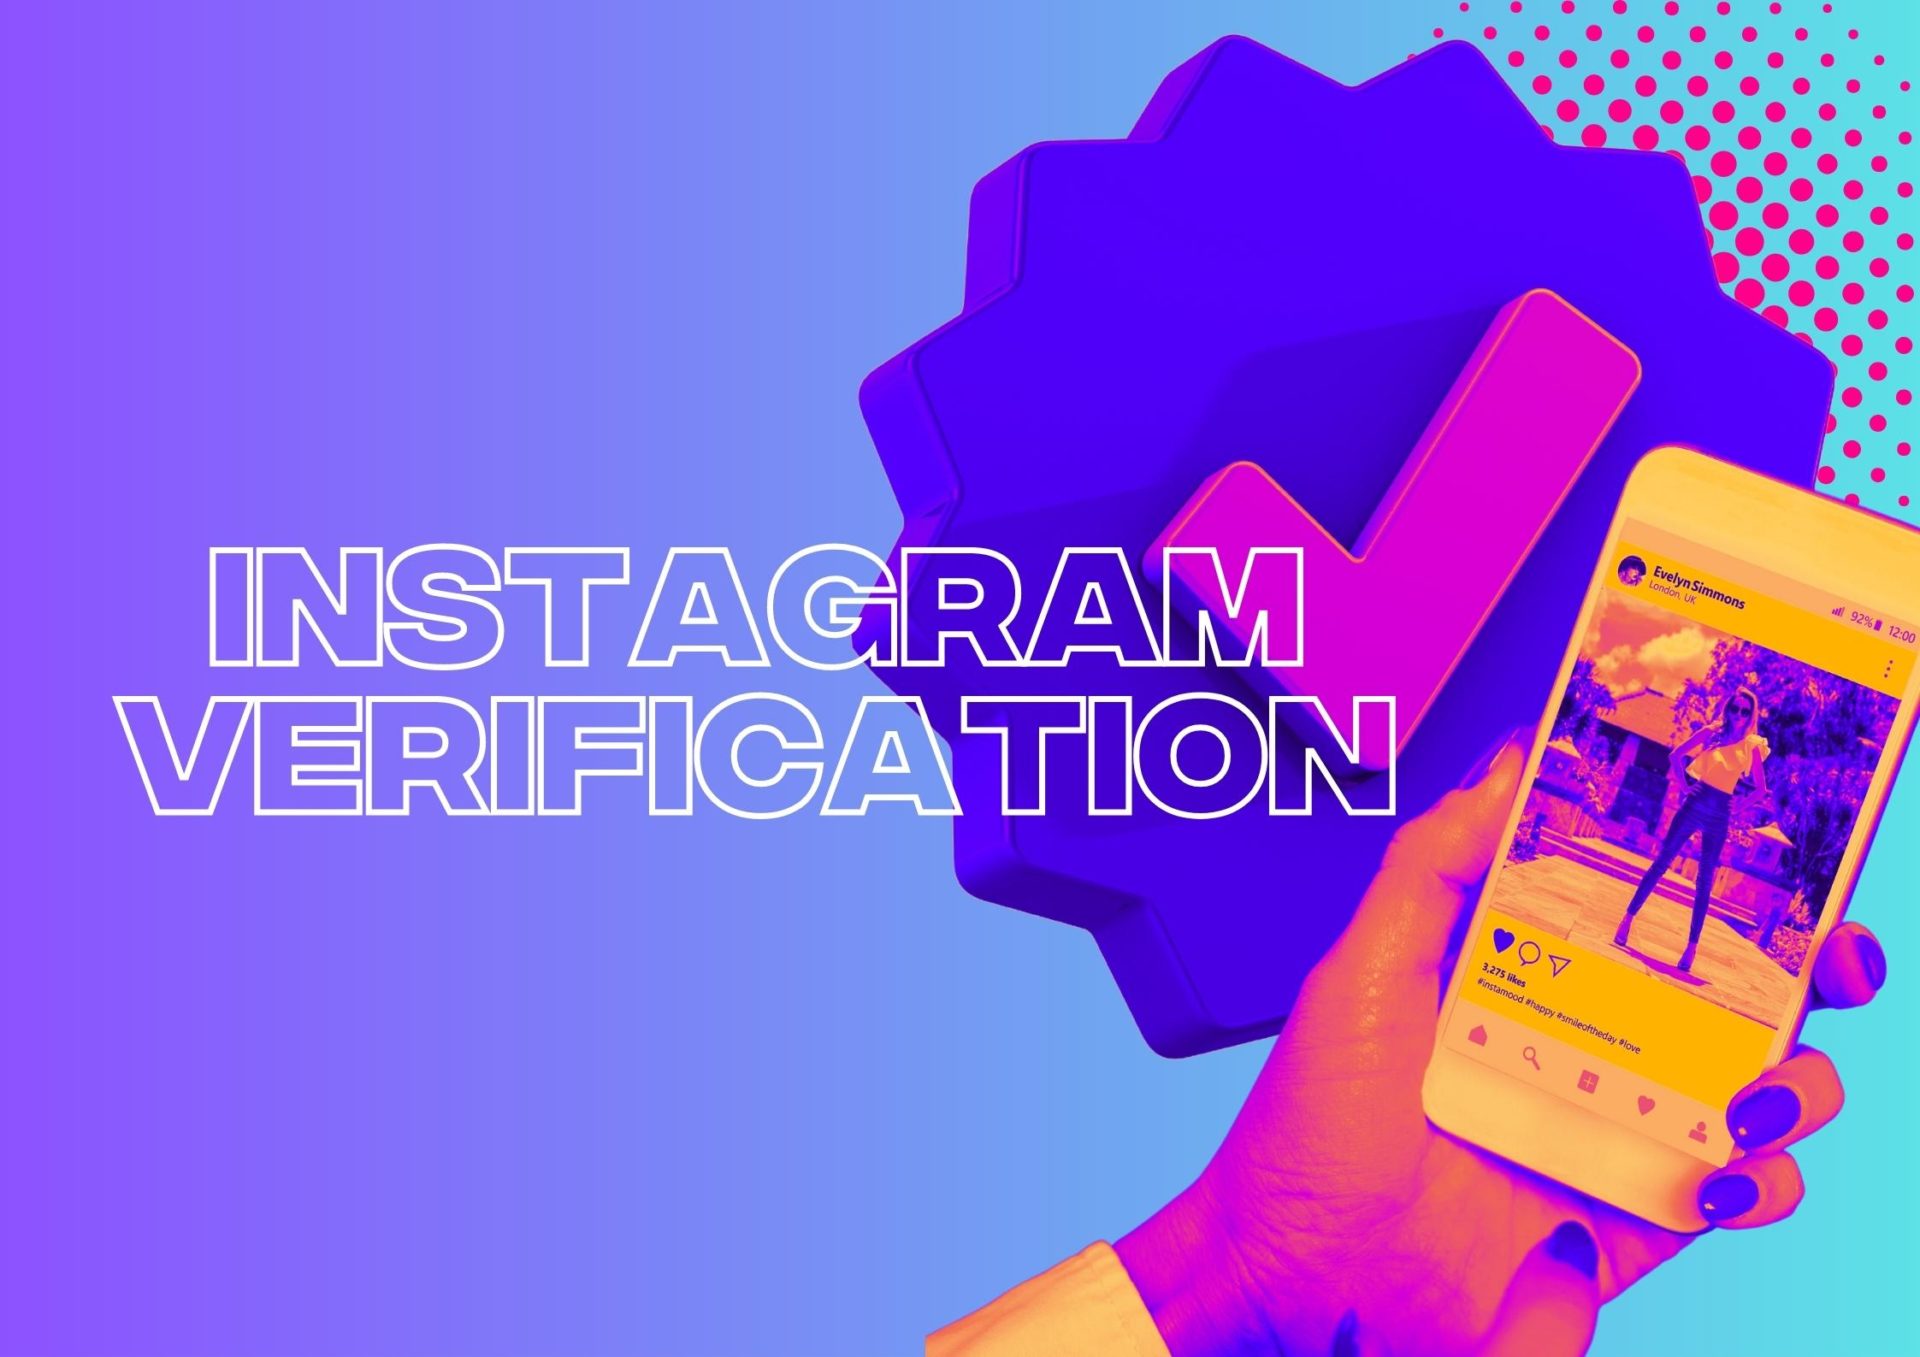 How To Get Verified On Instagram In 8 Simple Steps